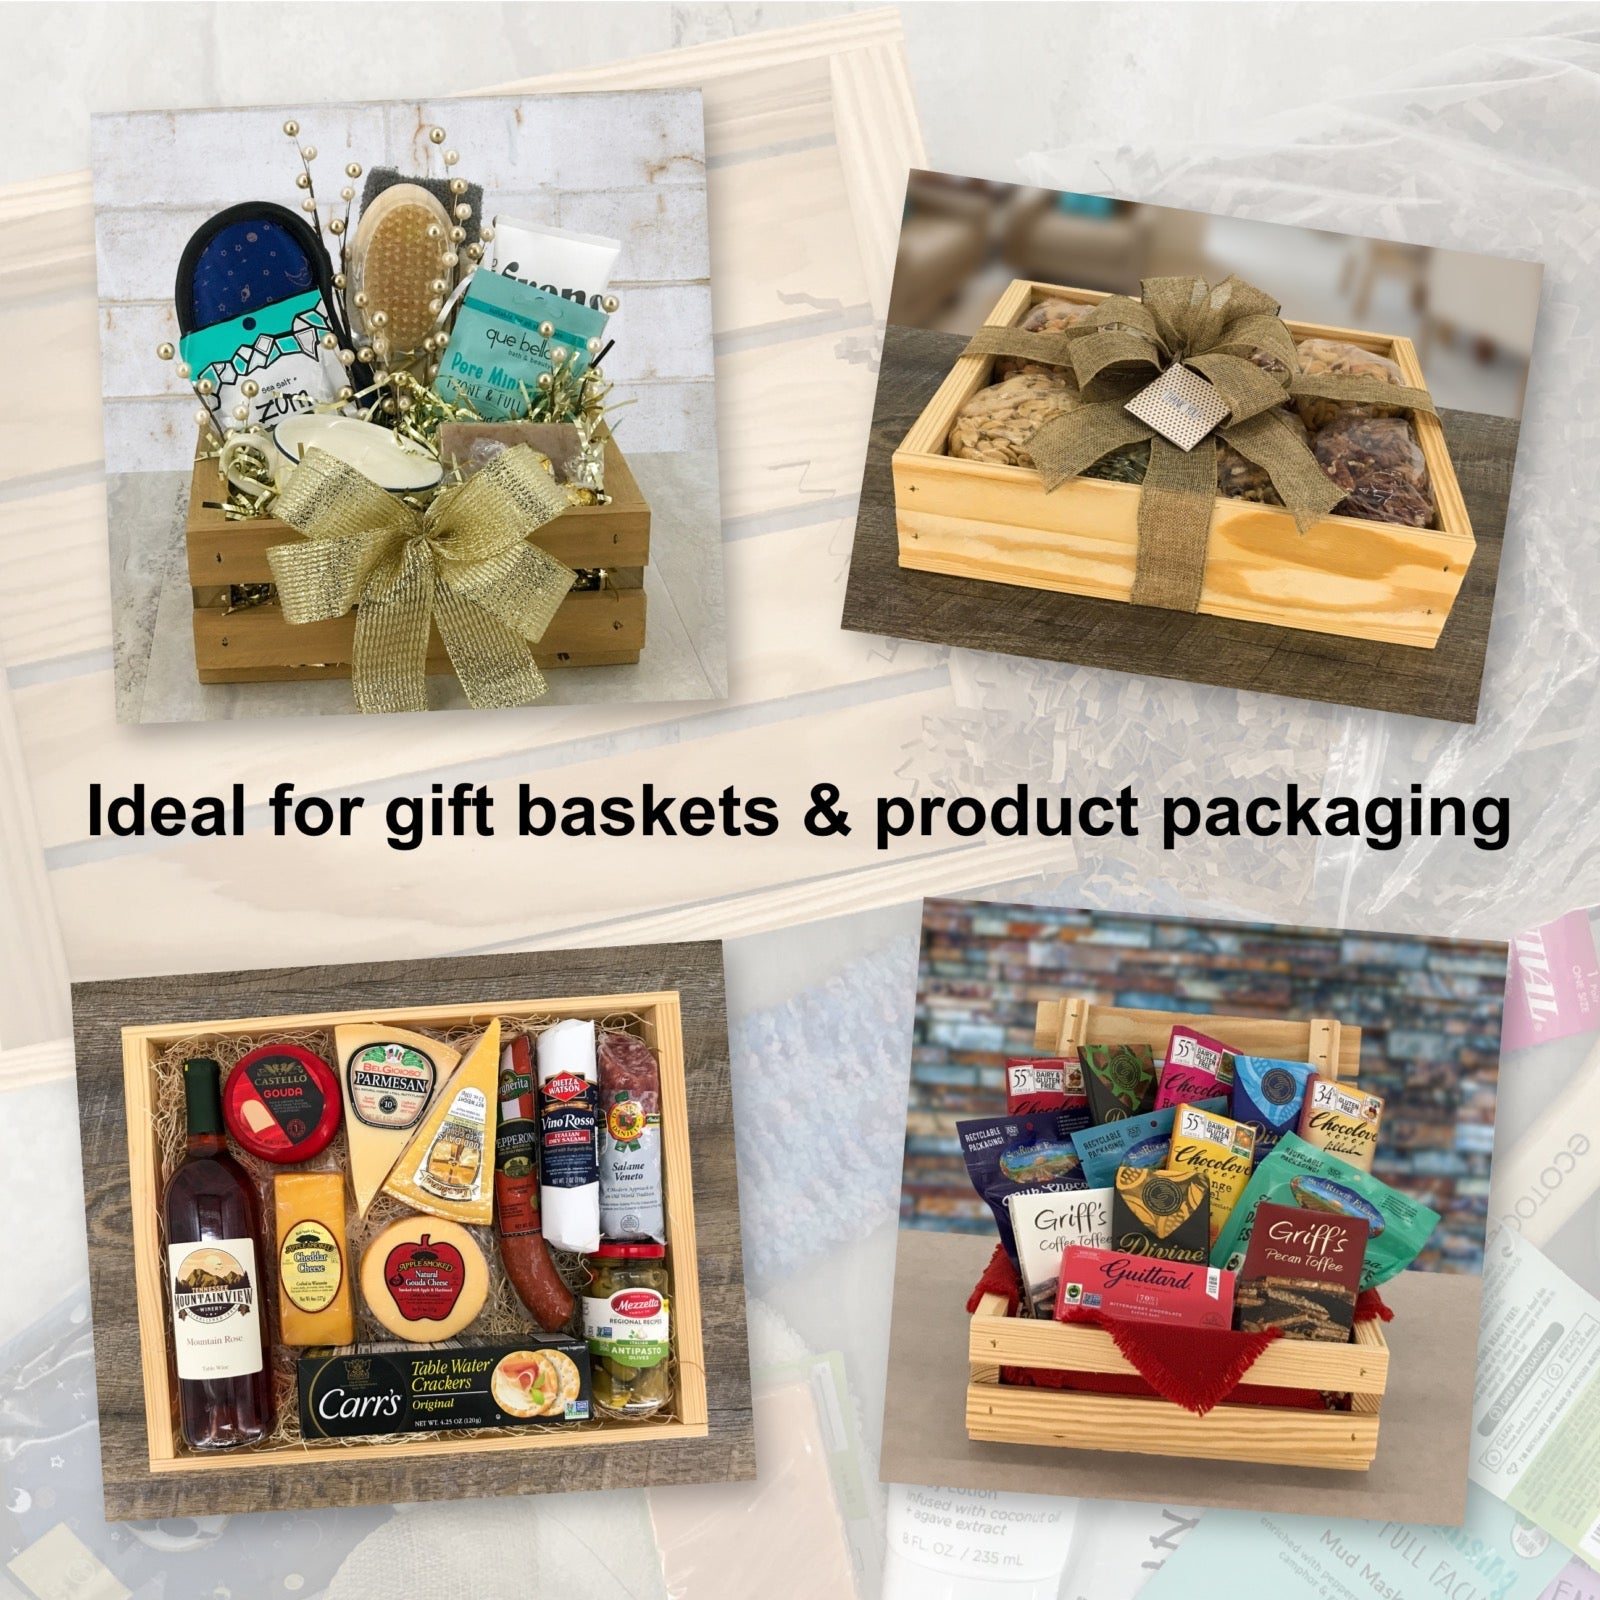 Ideal for gift baskets and product packaging